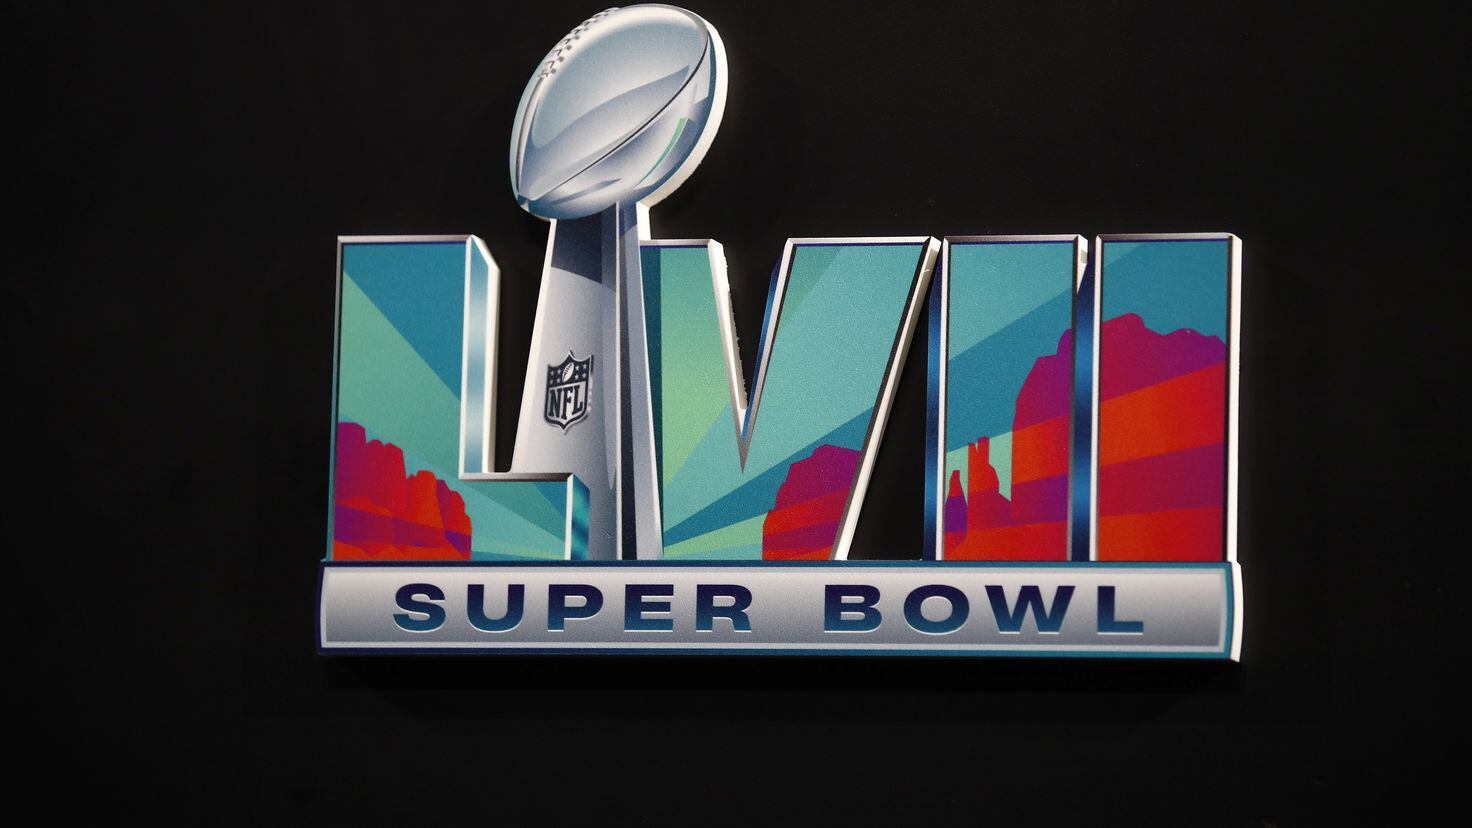 Super Bowl LV tickets going for as high as $85,000